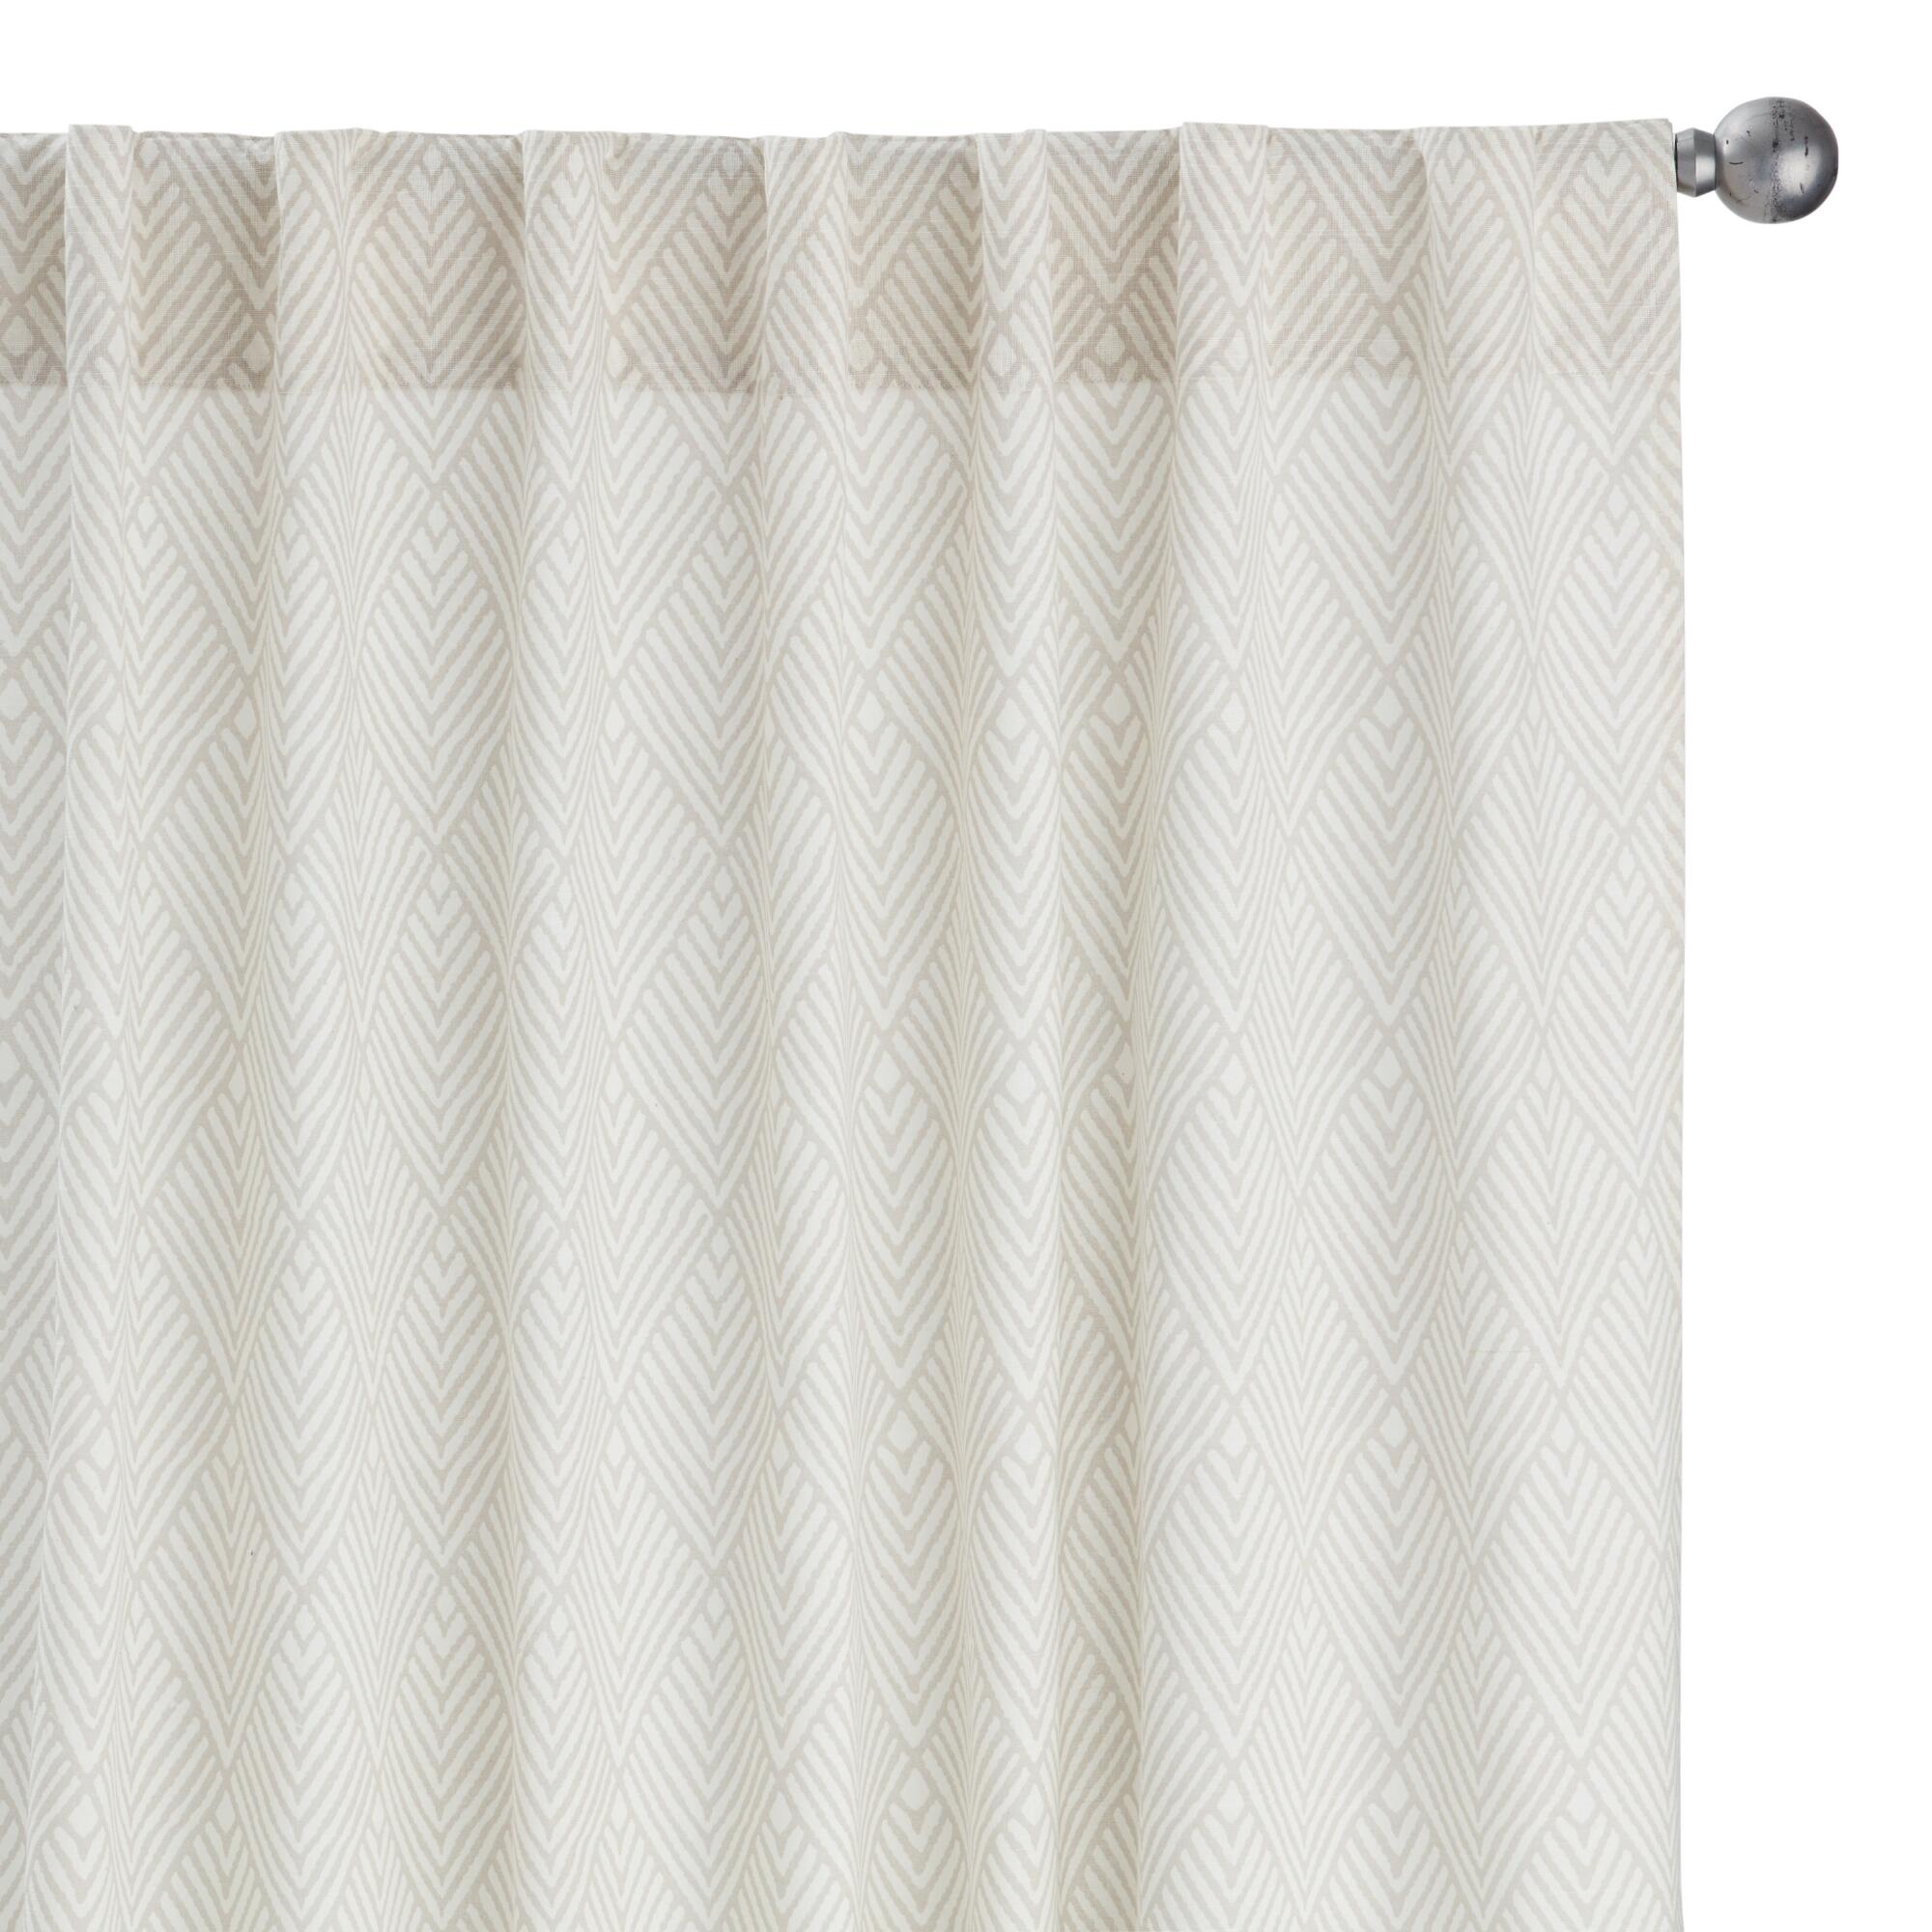 White And Tan Diamond Cotton Sleeve Top Curtains Set of 2: White/Natural - 84" L by World Market